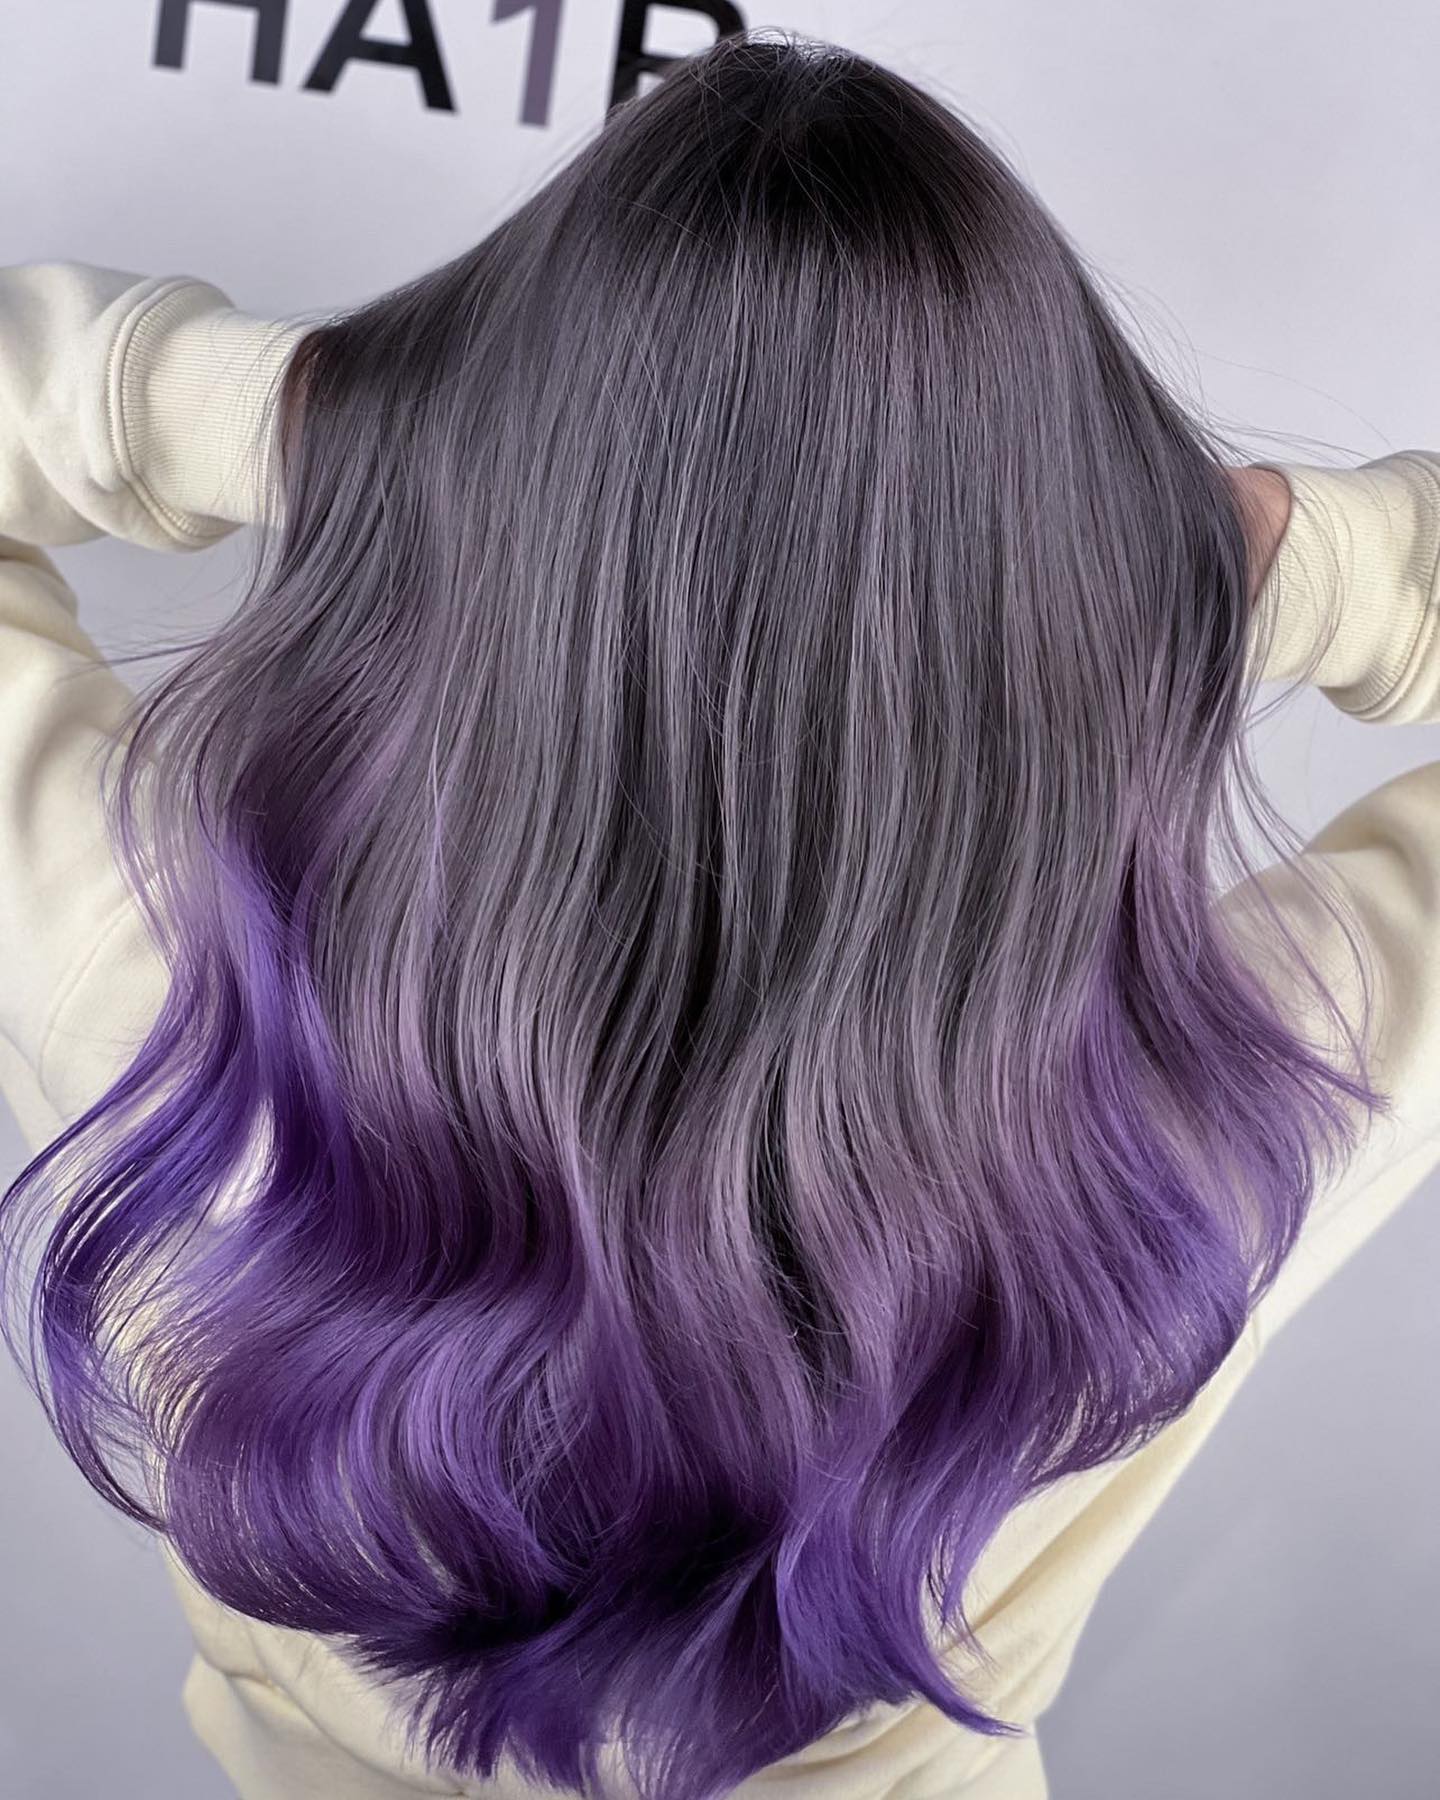 Long Dark Gray-to-Purple Ombre Hair Color